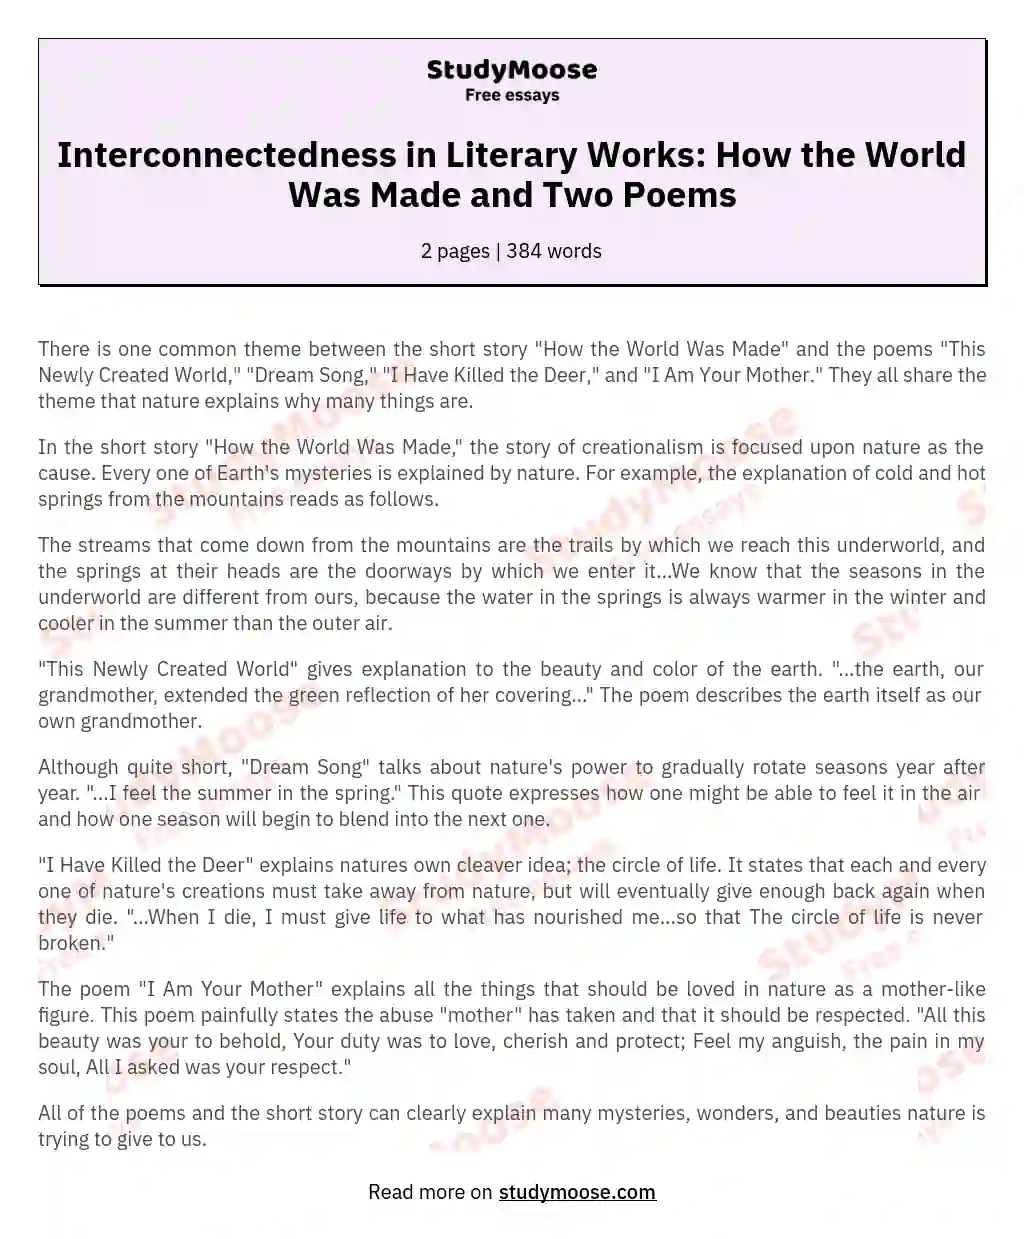 Interconnectedness in Literary Works: How the World Was Made and Two Poems essay